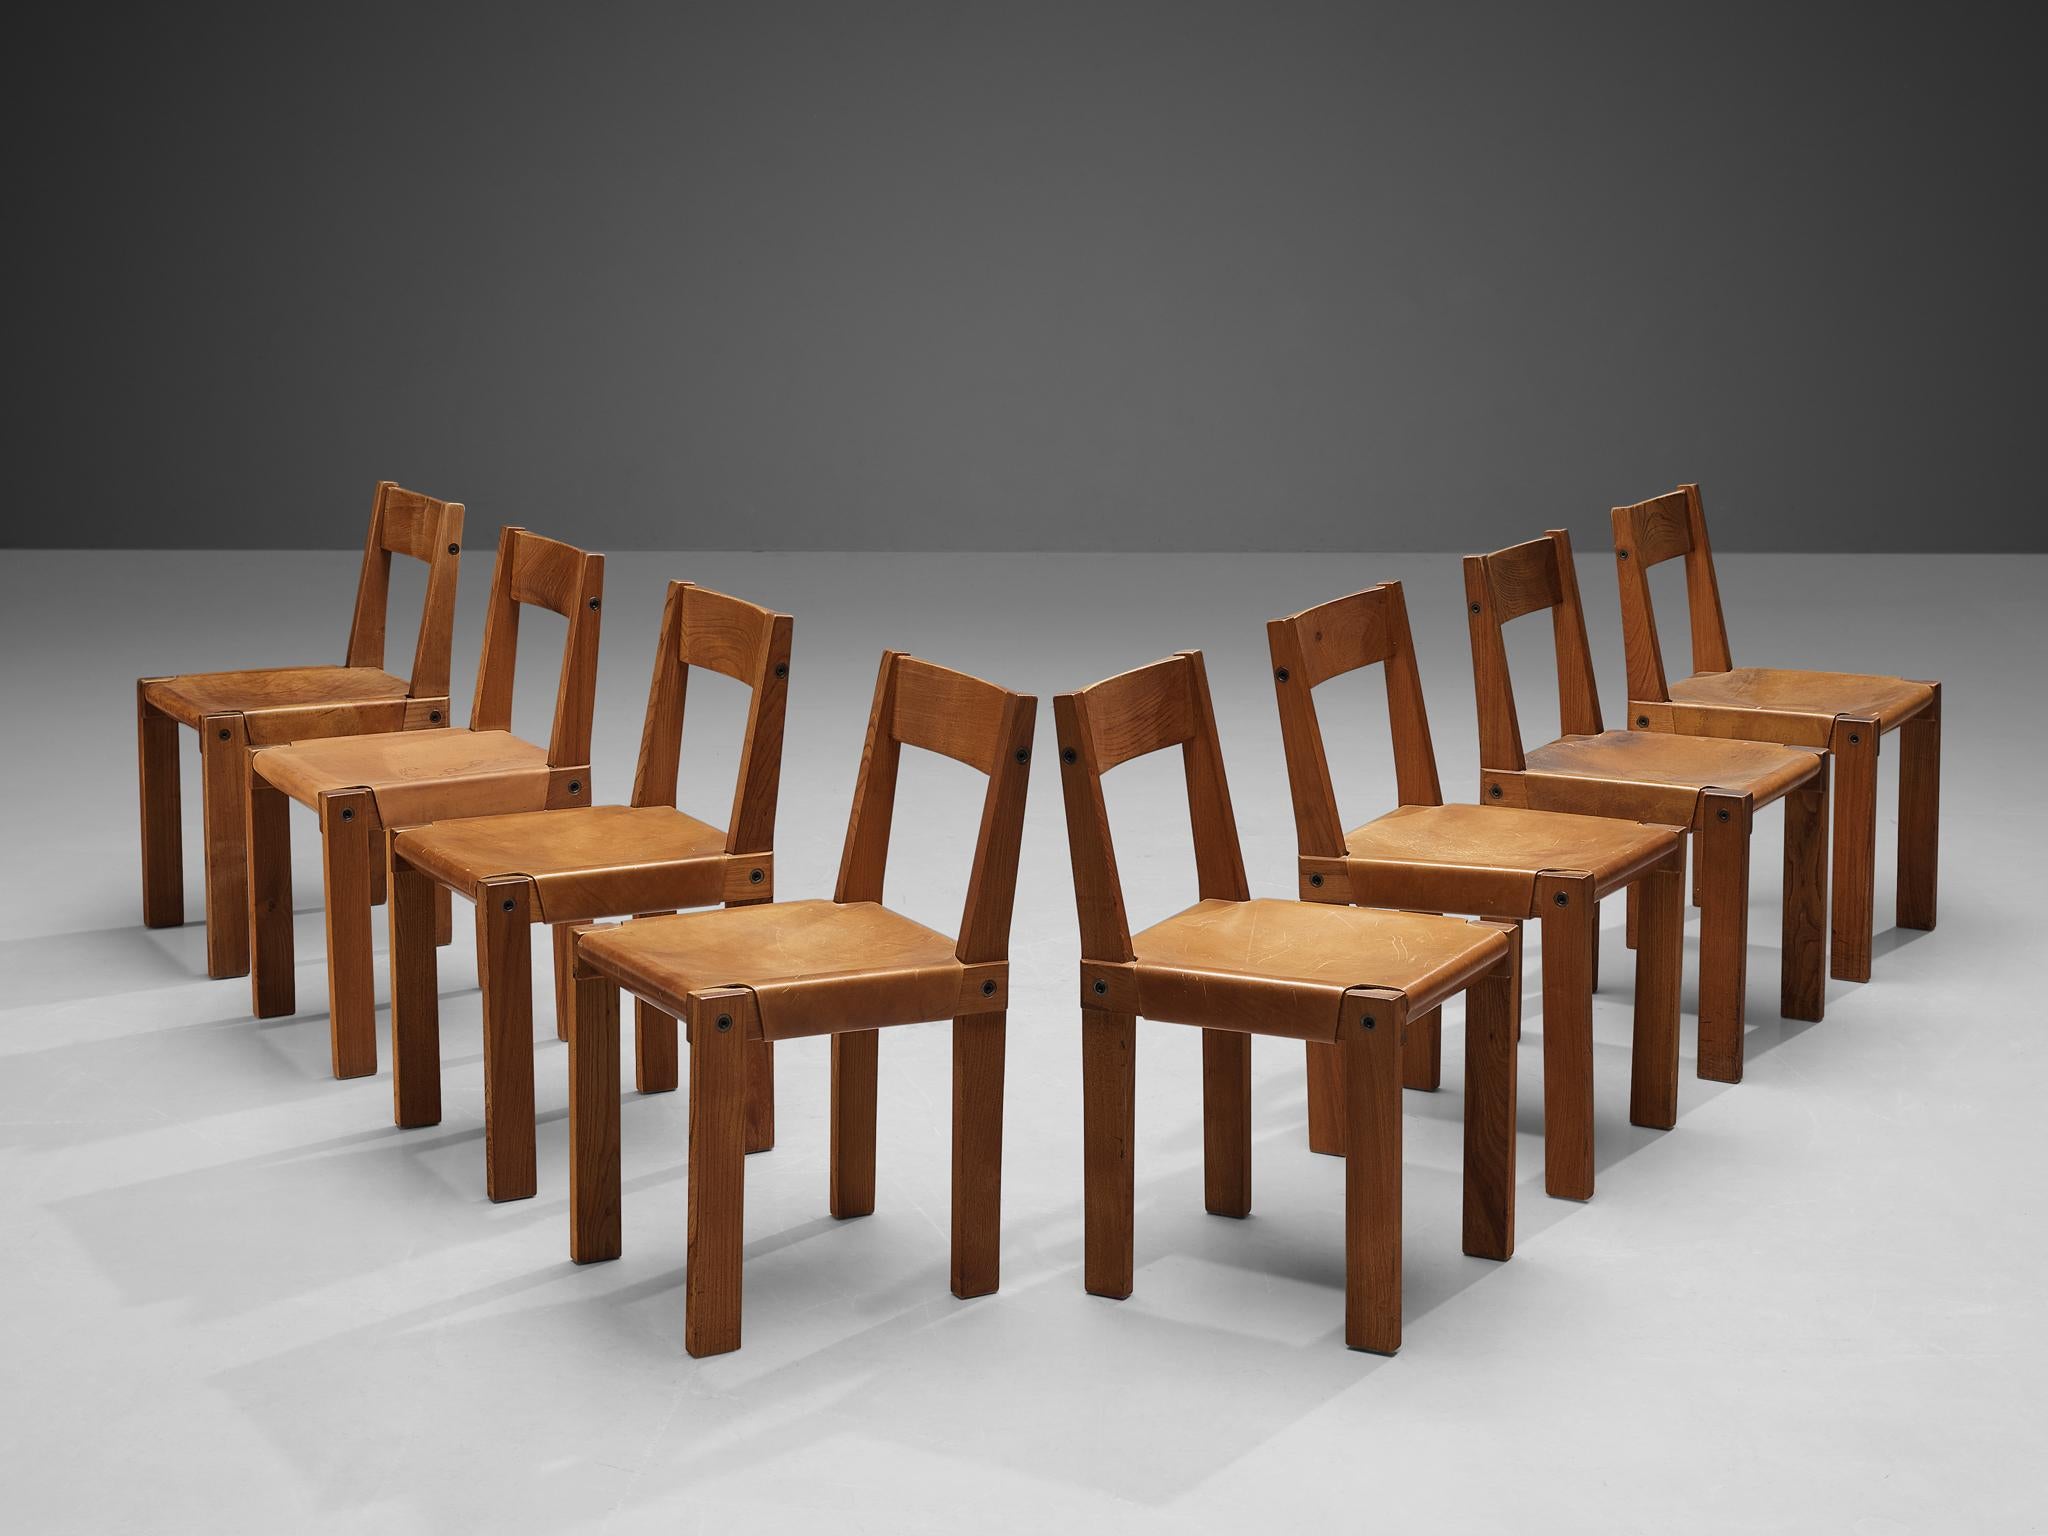 Pierre Chapo, dining chairs model 'S24', elm, leather, France, circa 1966.

Dining chairs in solid elmwood with saddle leather seating and back designed by French designer Pierre Chapo. These chairs have a cubic design of solid elmwood with cognac